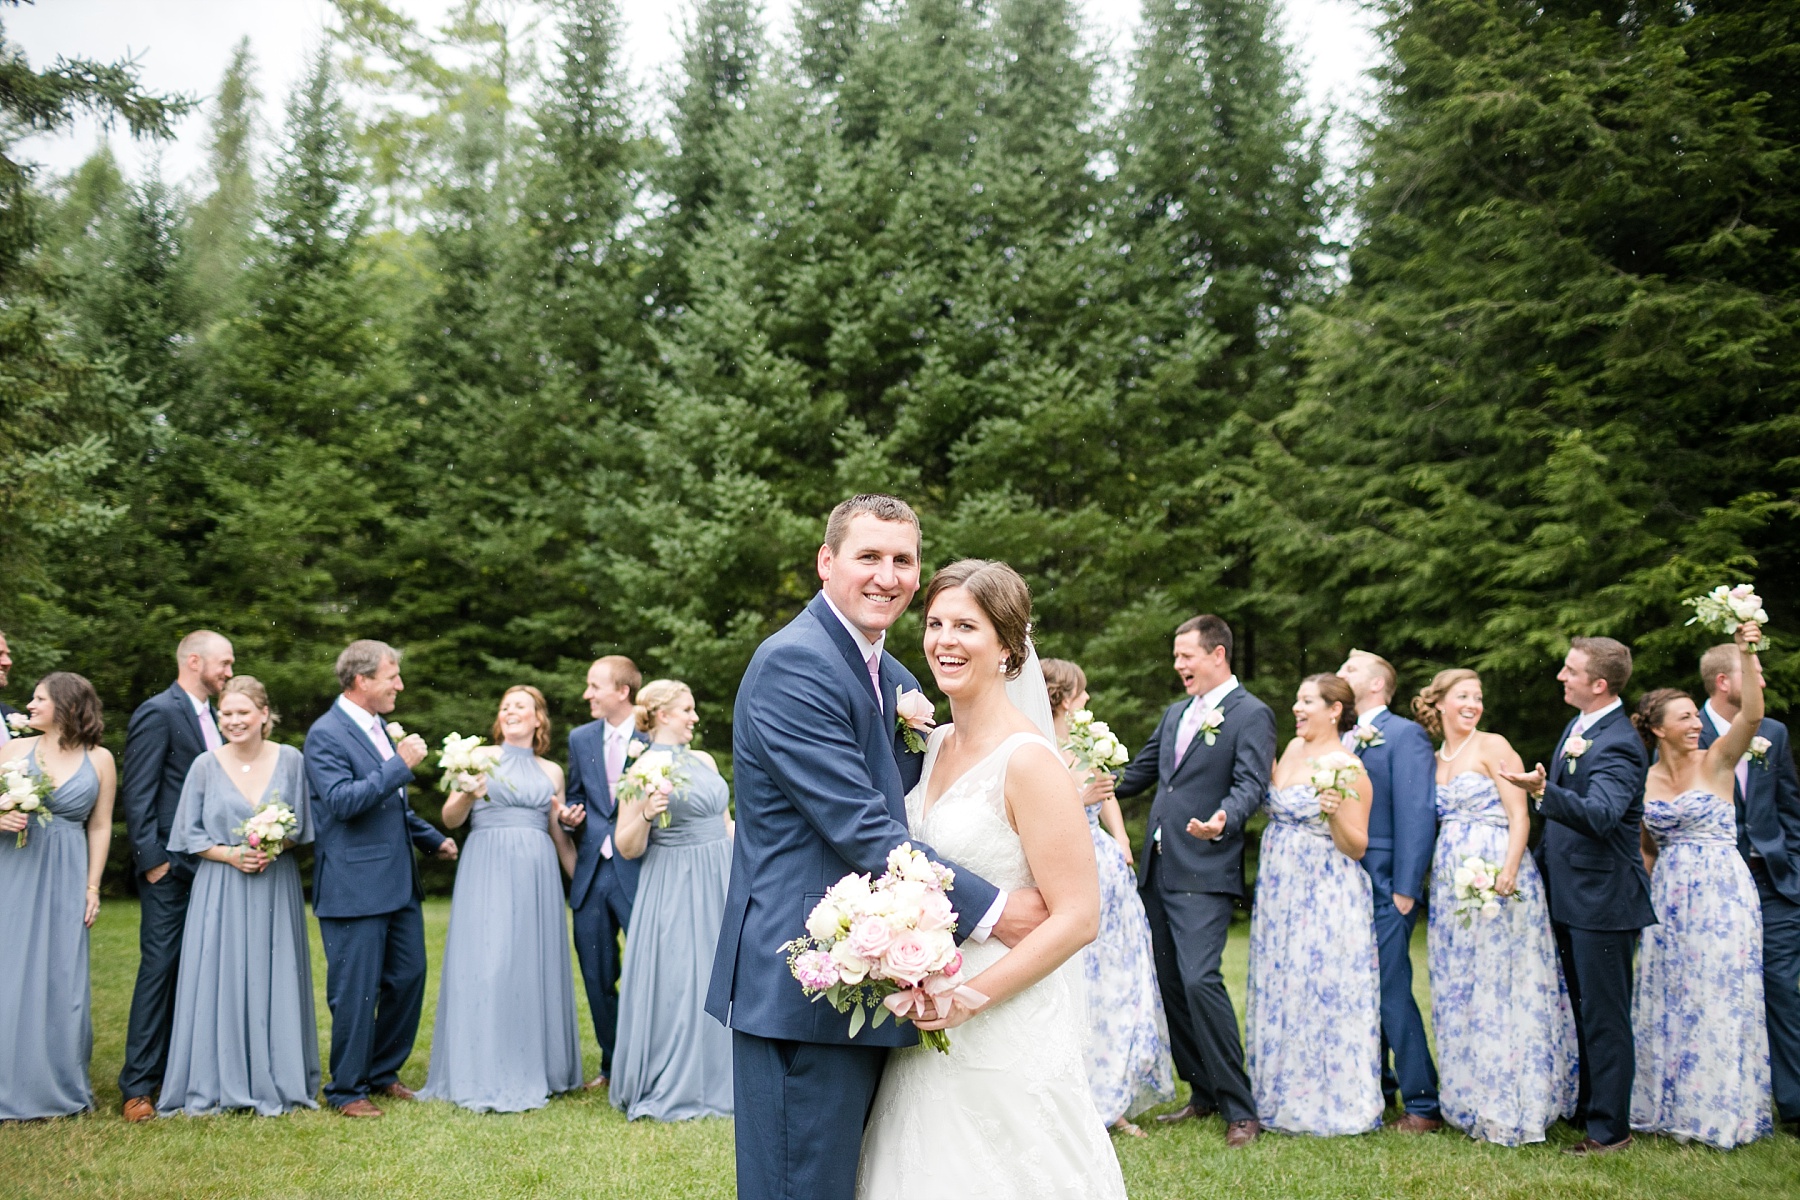 Maureen & Jamie were married on the shores of Little Saint Germain Lake, pouring rain & gale force winds couldn't stop them both from smiling from ear to ear.